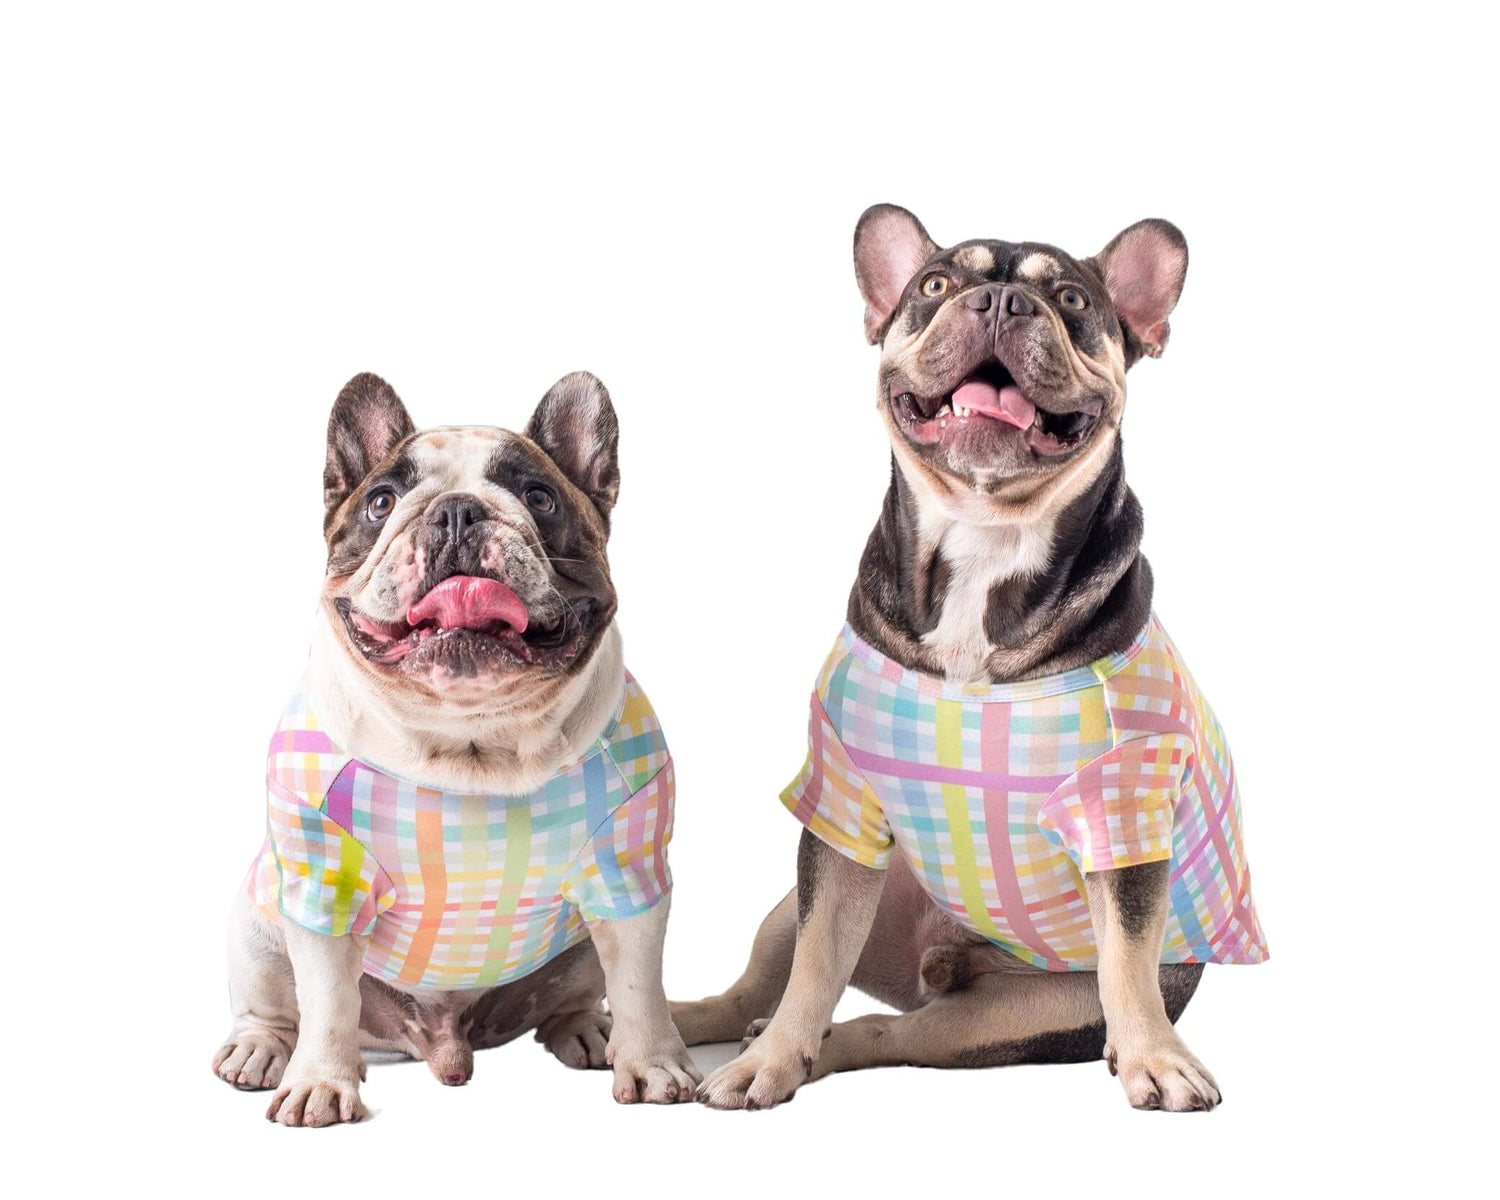 Two adorable French Bulldogs wearing Colour Me gingham shirt for dogs by Vibrant Hound - a vibrant rainbow-colored clothing for dogs.